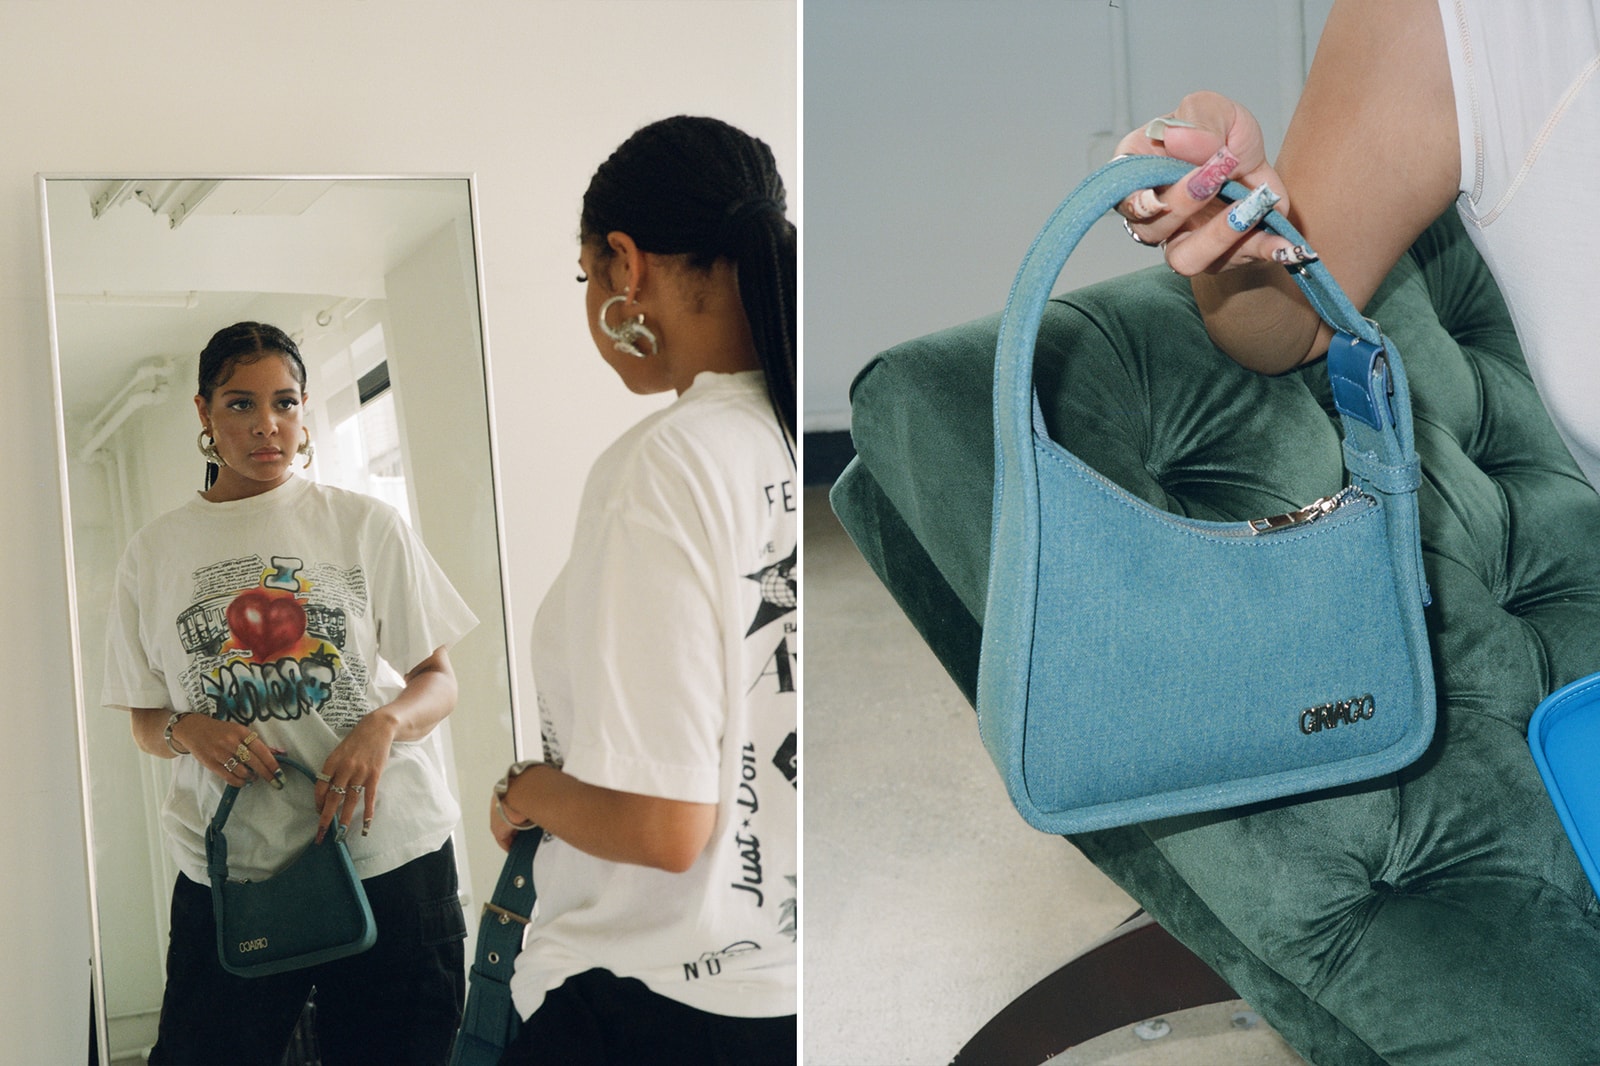 behind the atelier ashley ciriaco sustainable handbags brand asymmetrical ready-to-wear interview